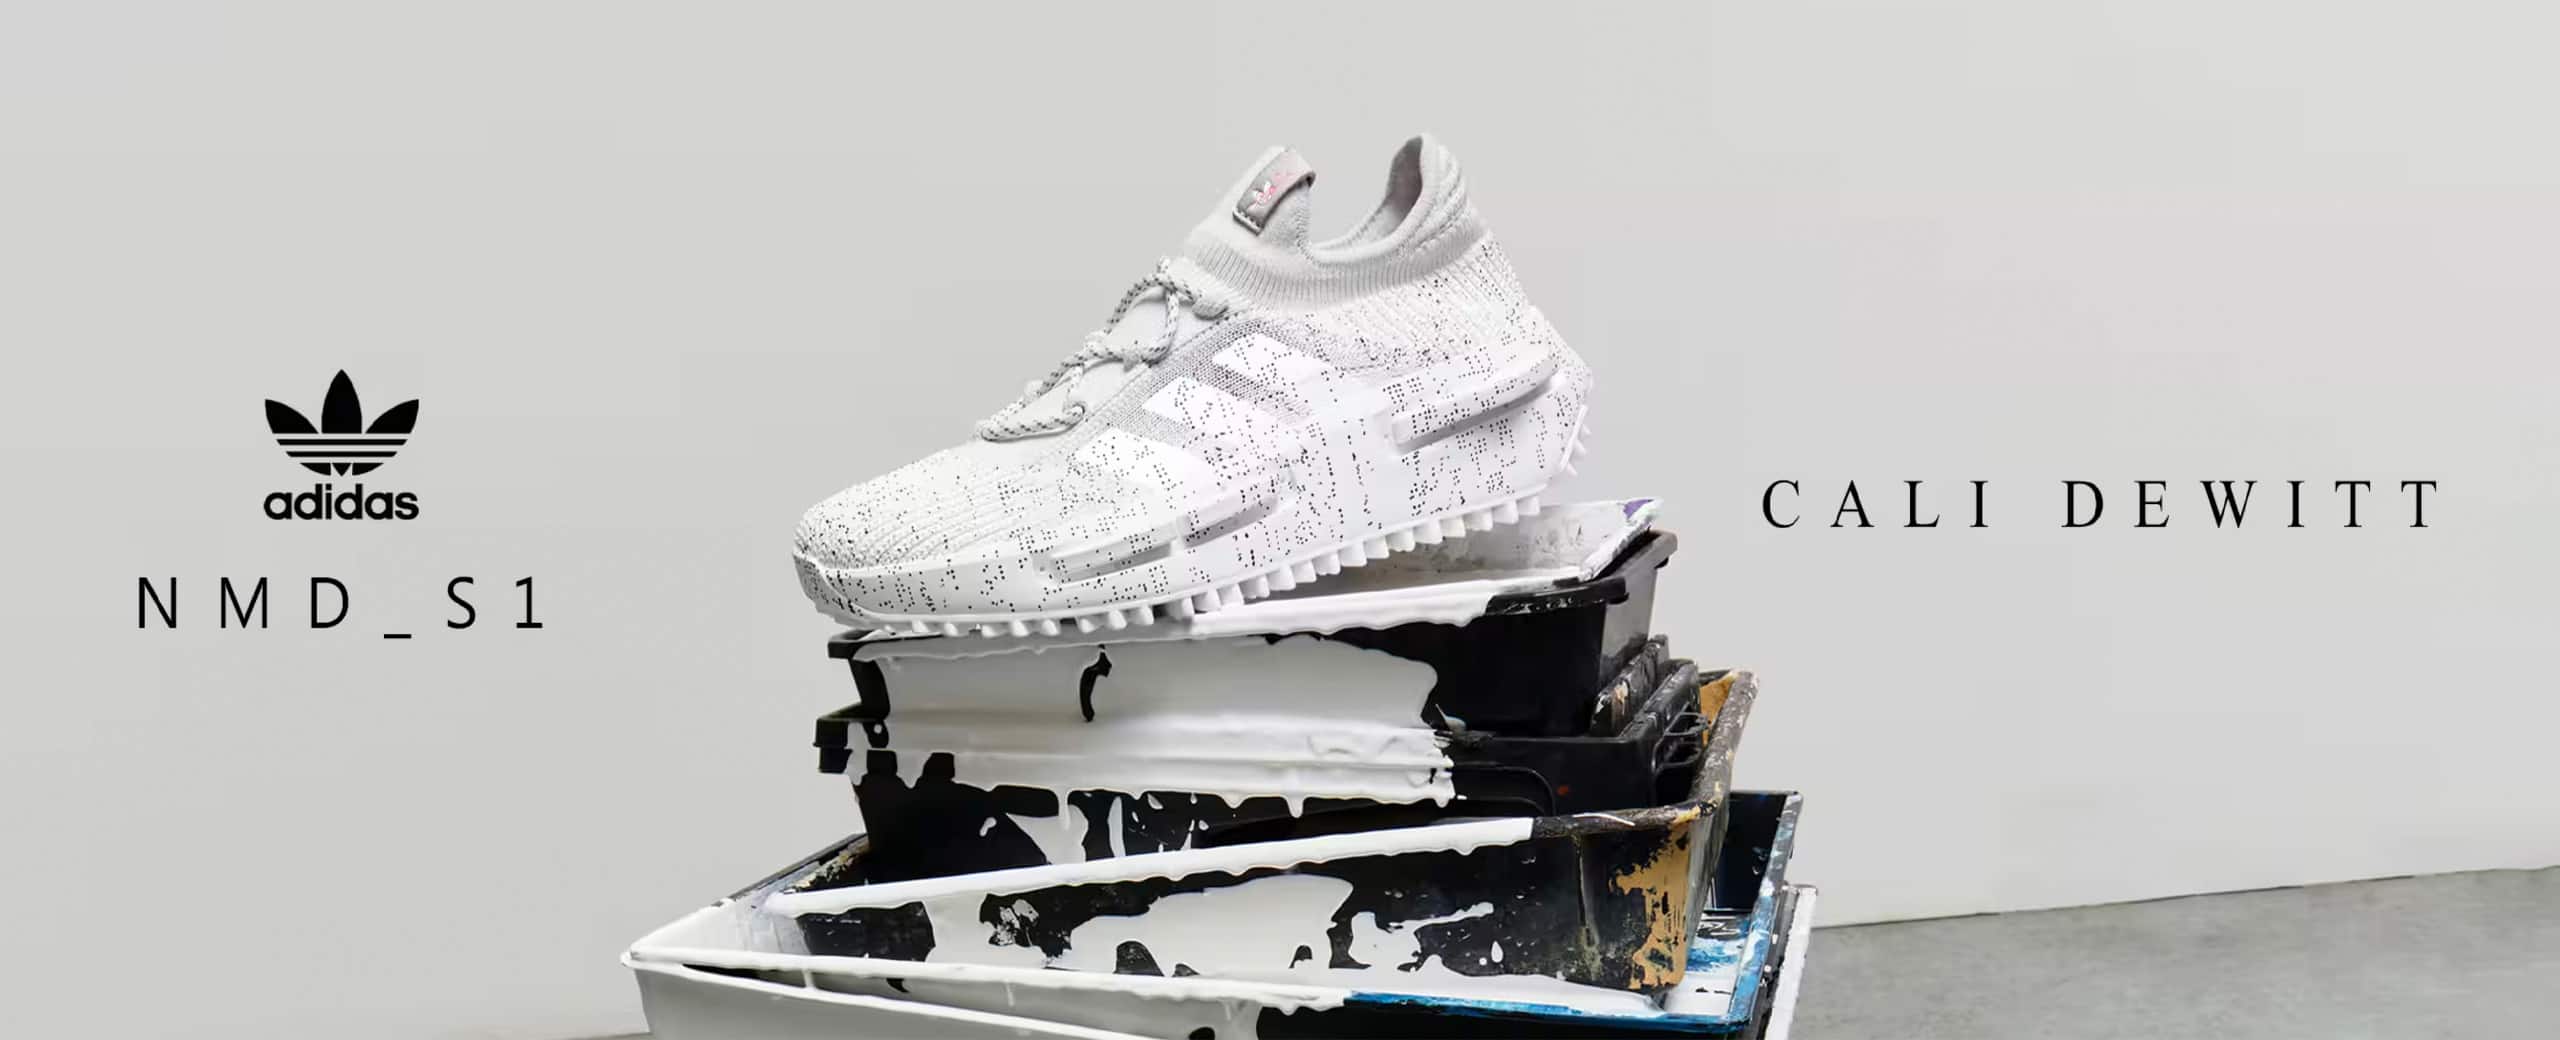 adidas NMD_S1 CALI DEWITT CRYWHT/FTWWHT/DSHGRY 23SS-S